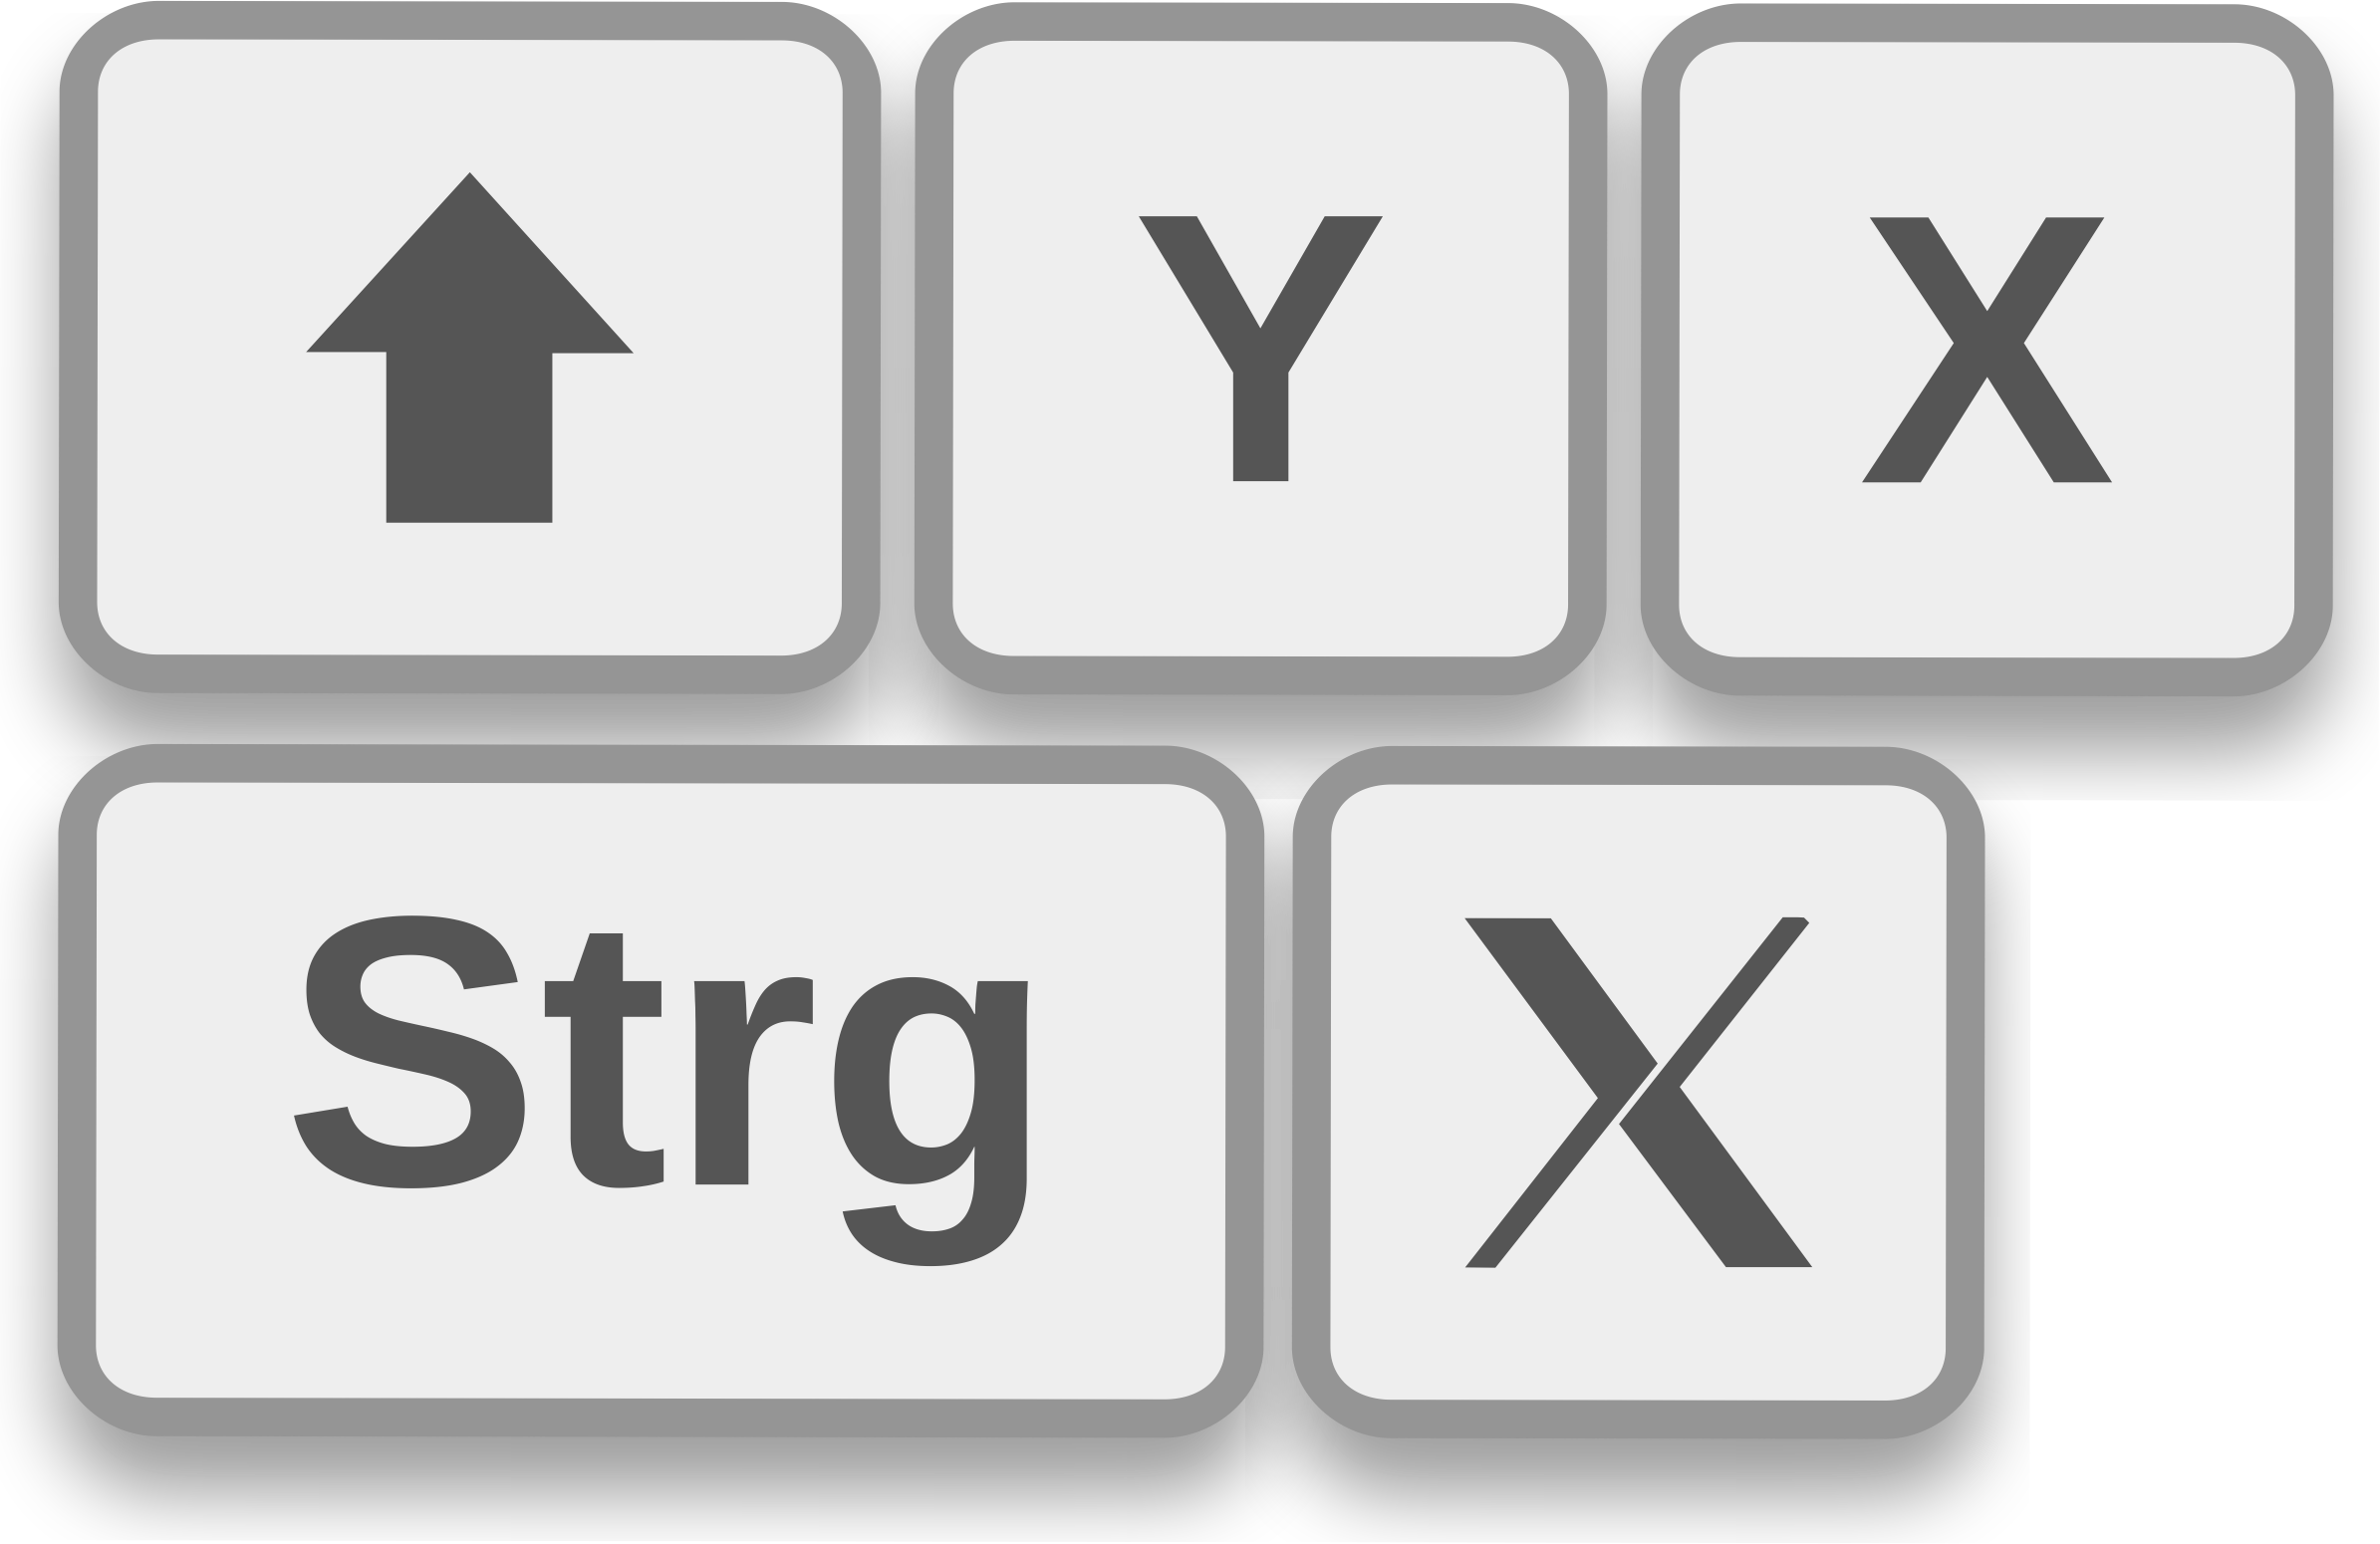 This Free Icons Png Design Of Keyboard Shortcuts